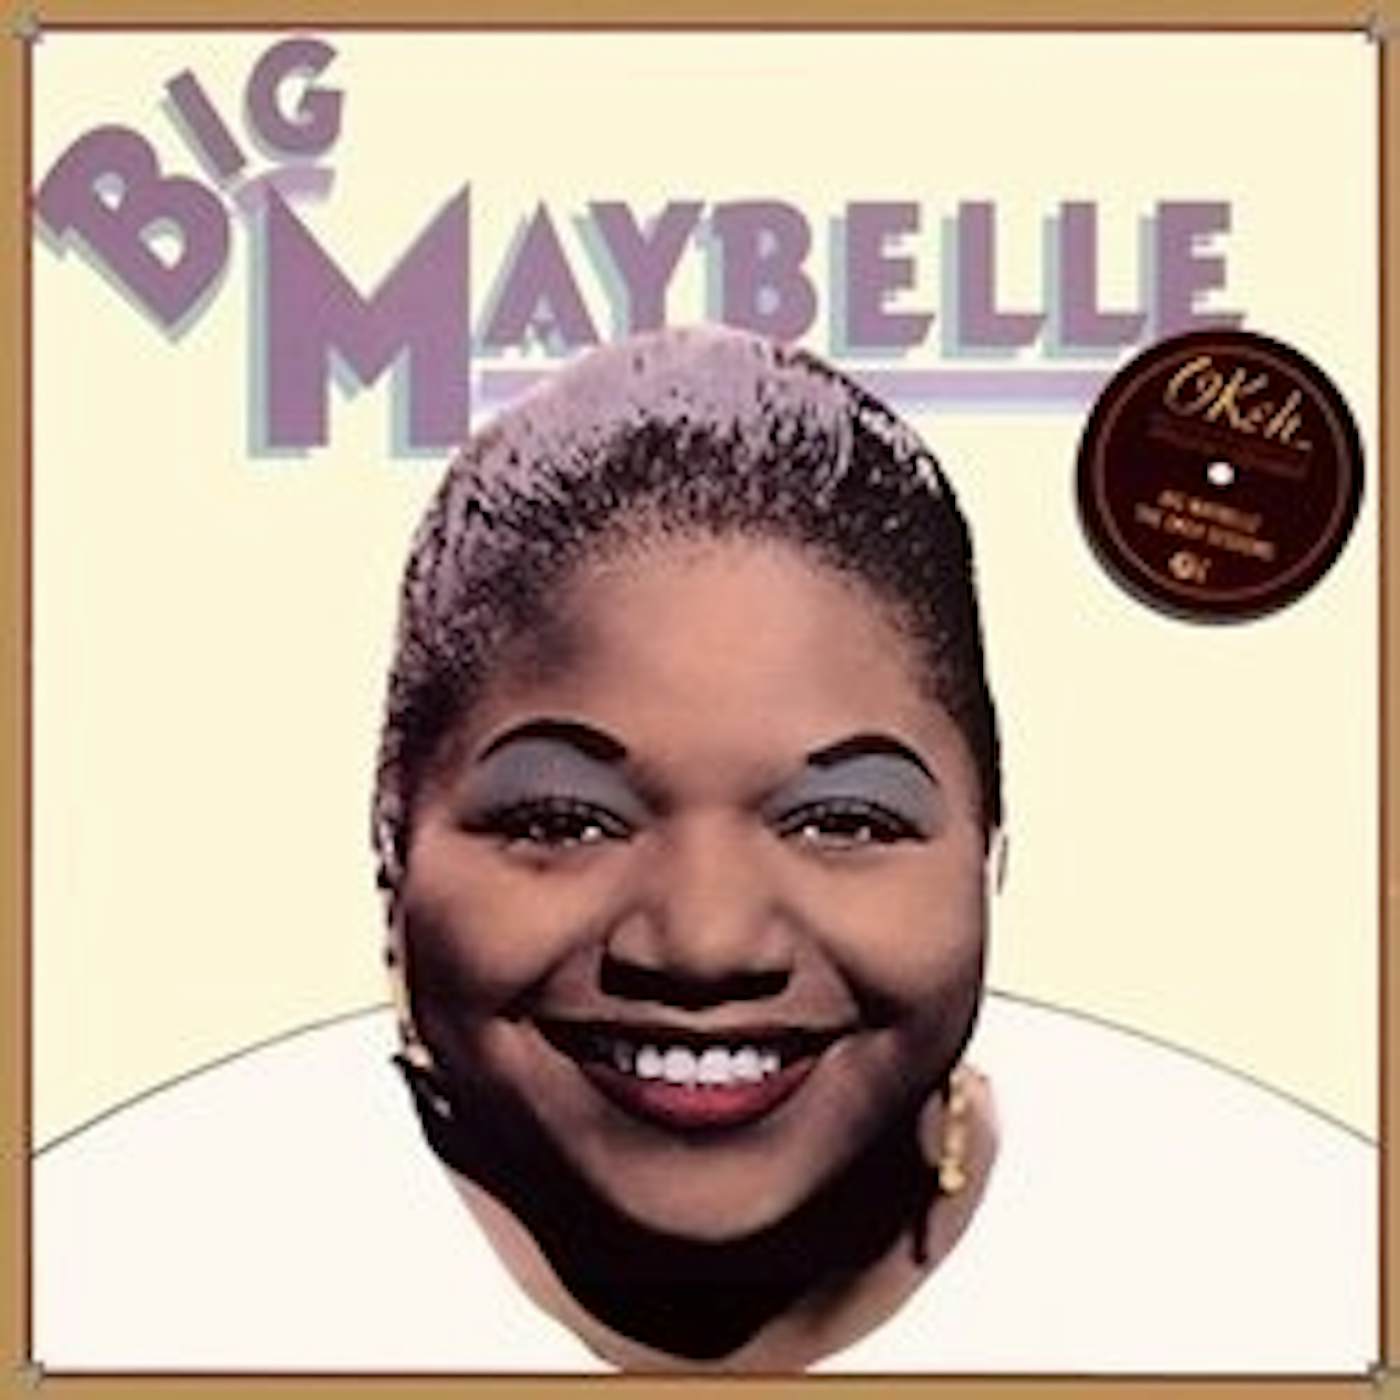 Big Maybelle OKEH SESSIONS Vinyl Record